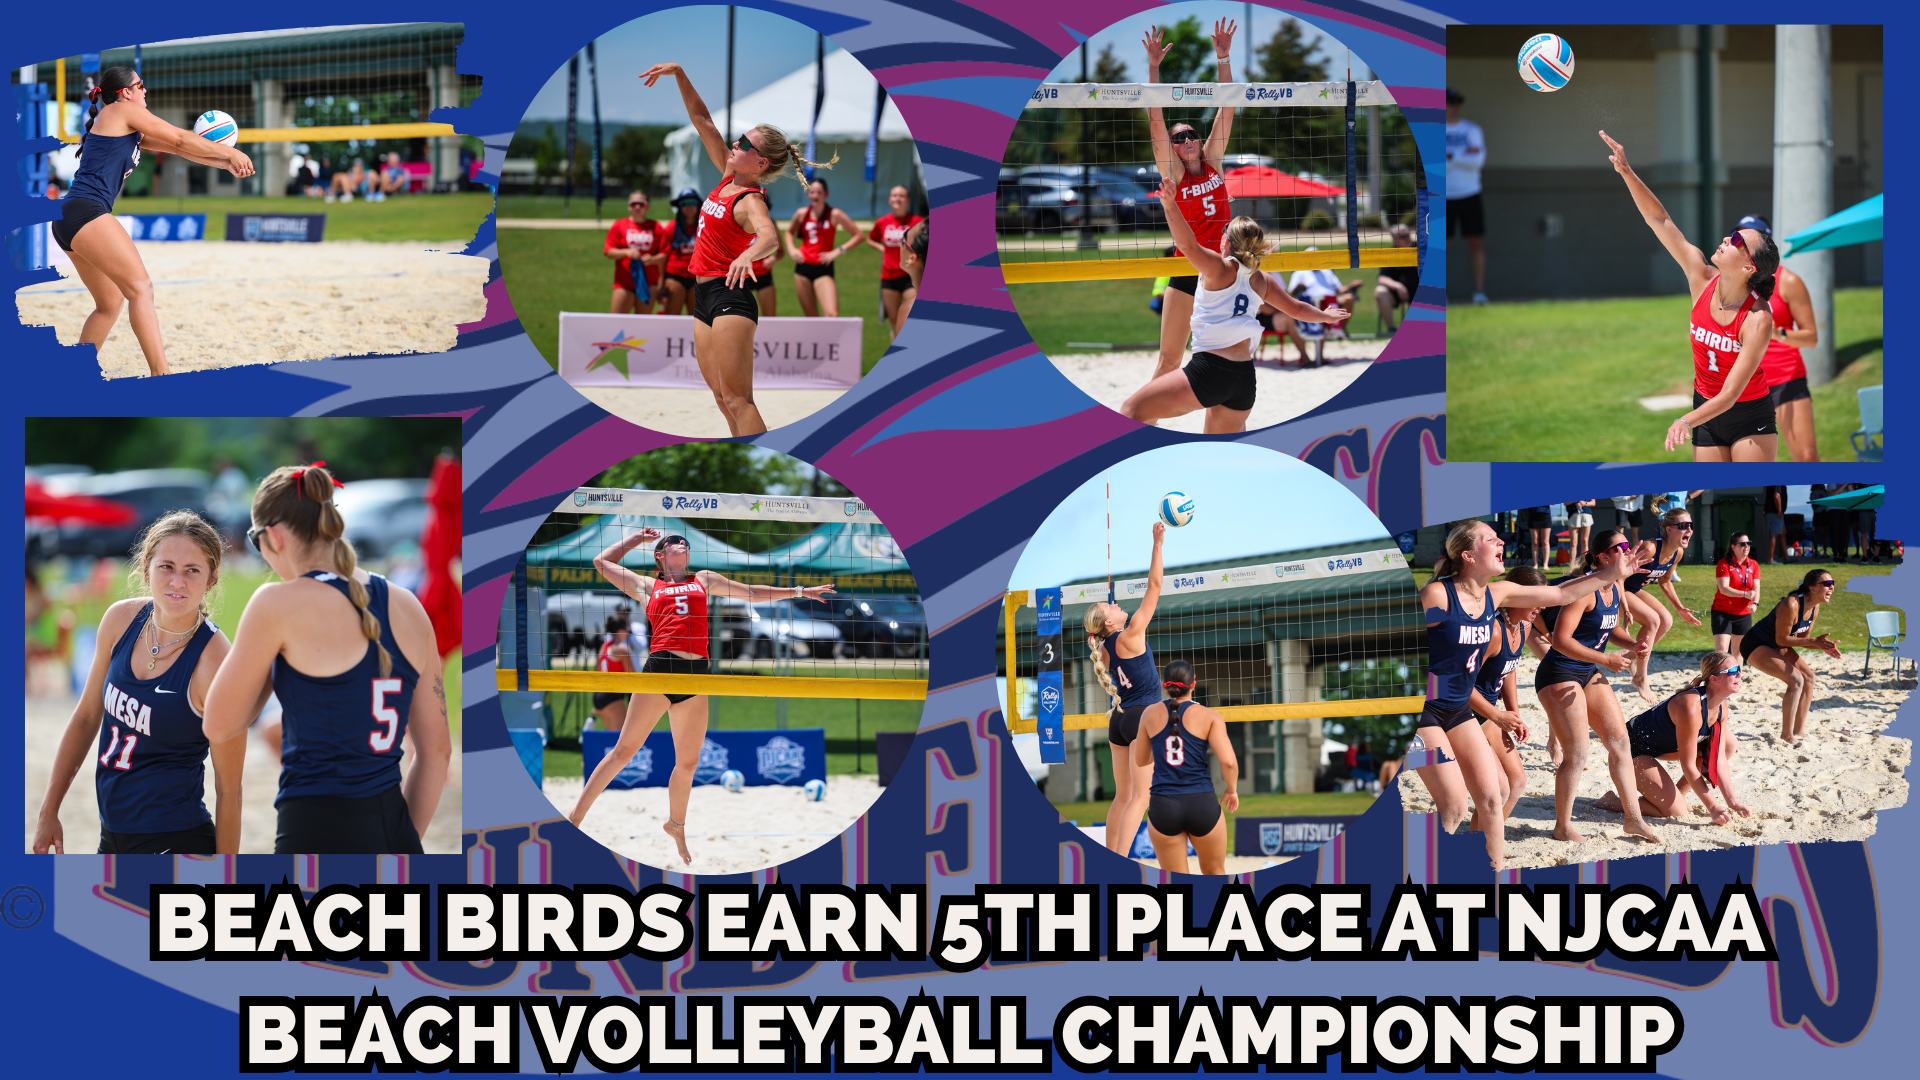 Beach Birds finish best season in program history with 5th place finish at Nationals